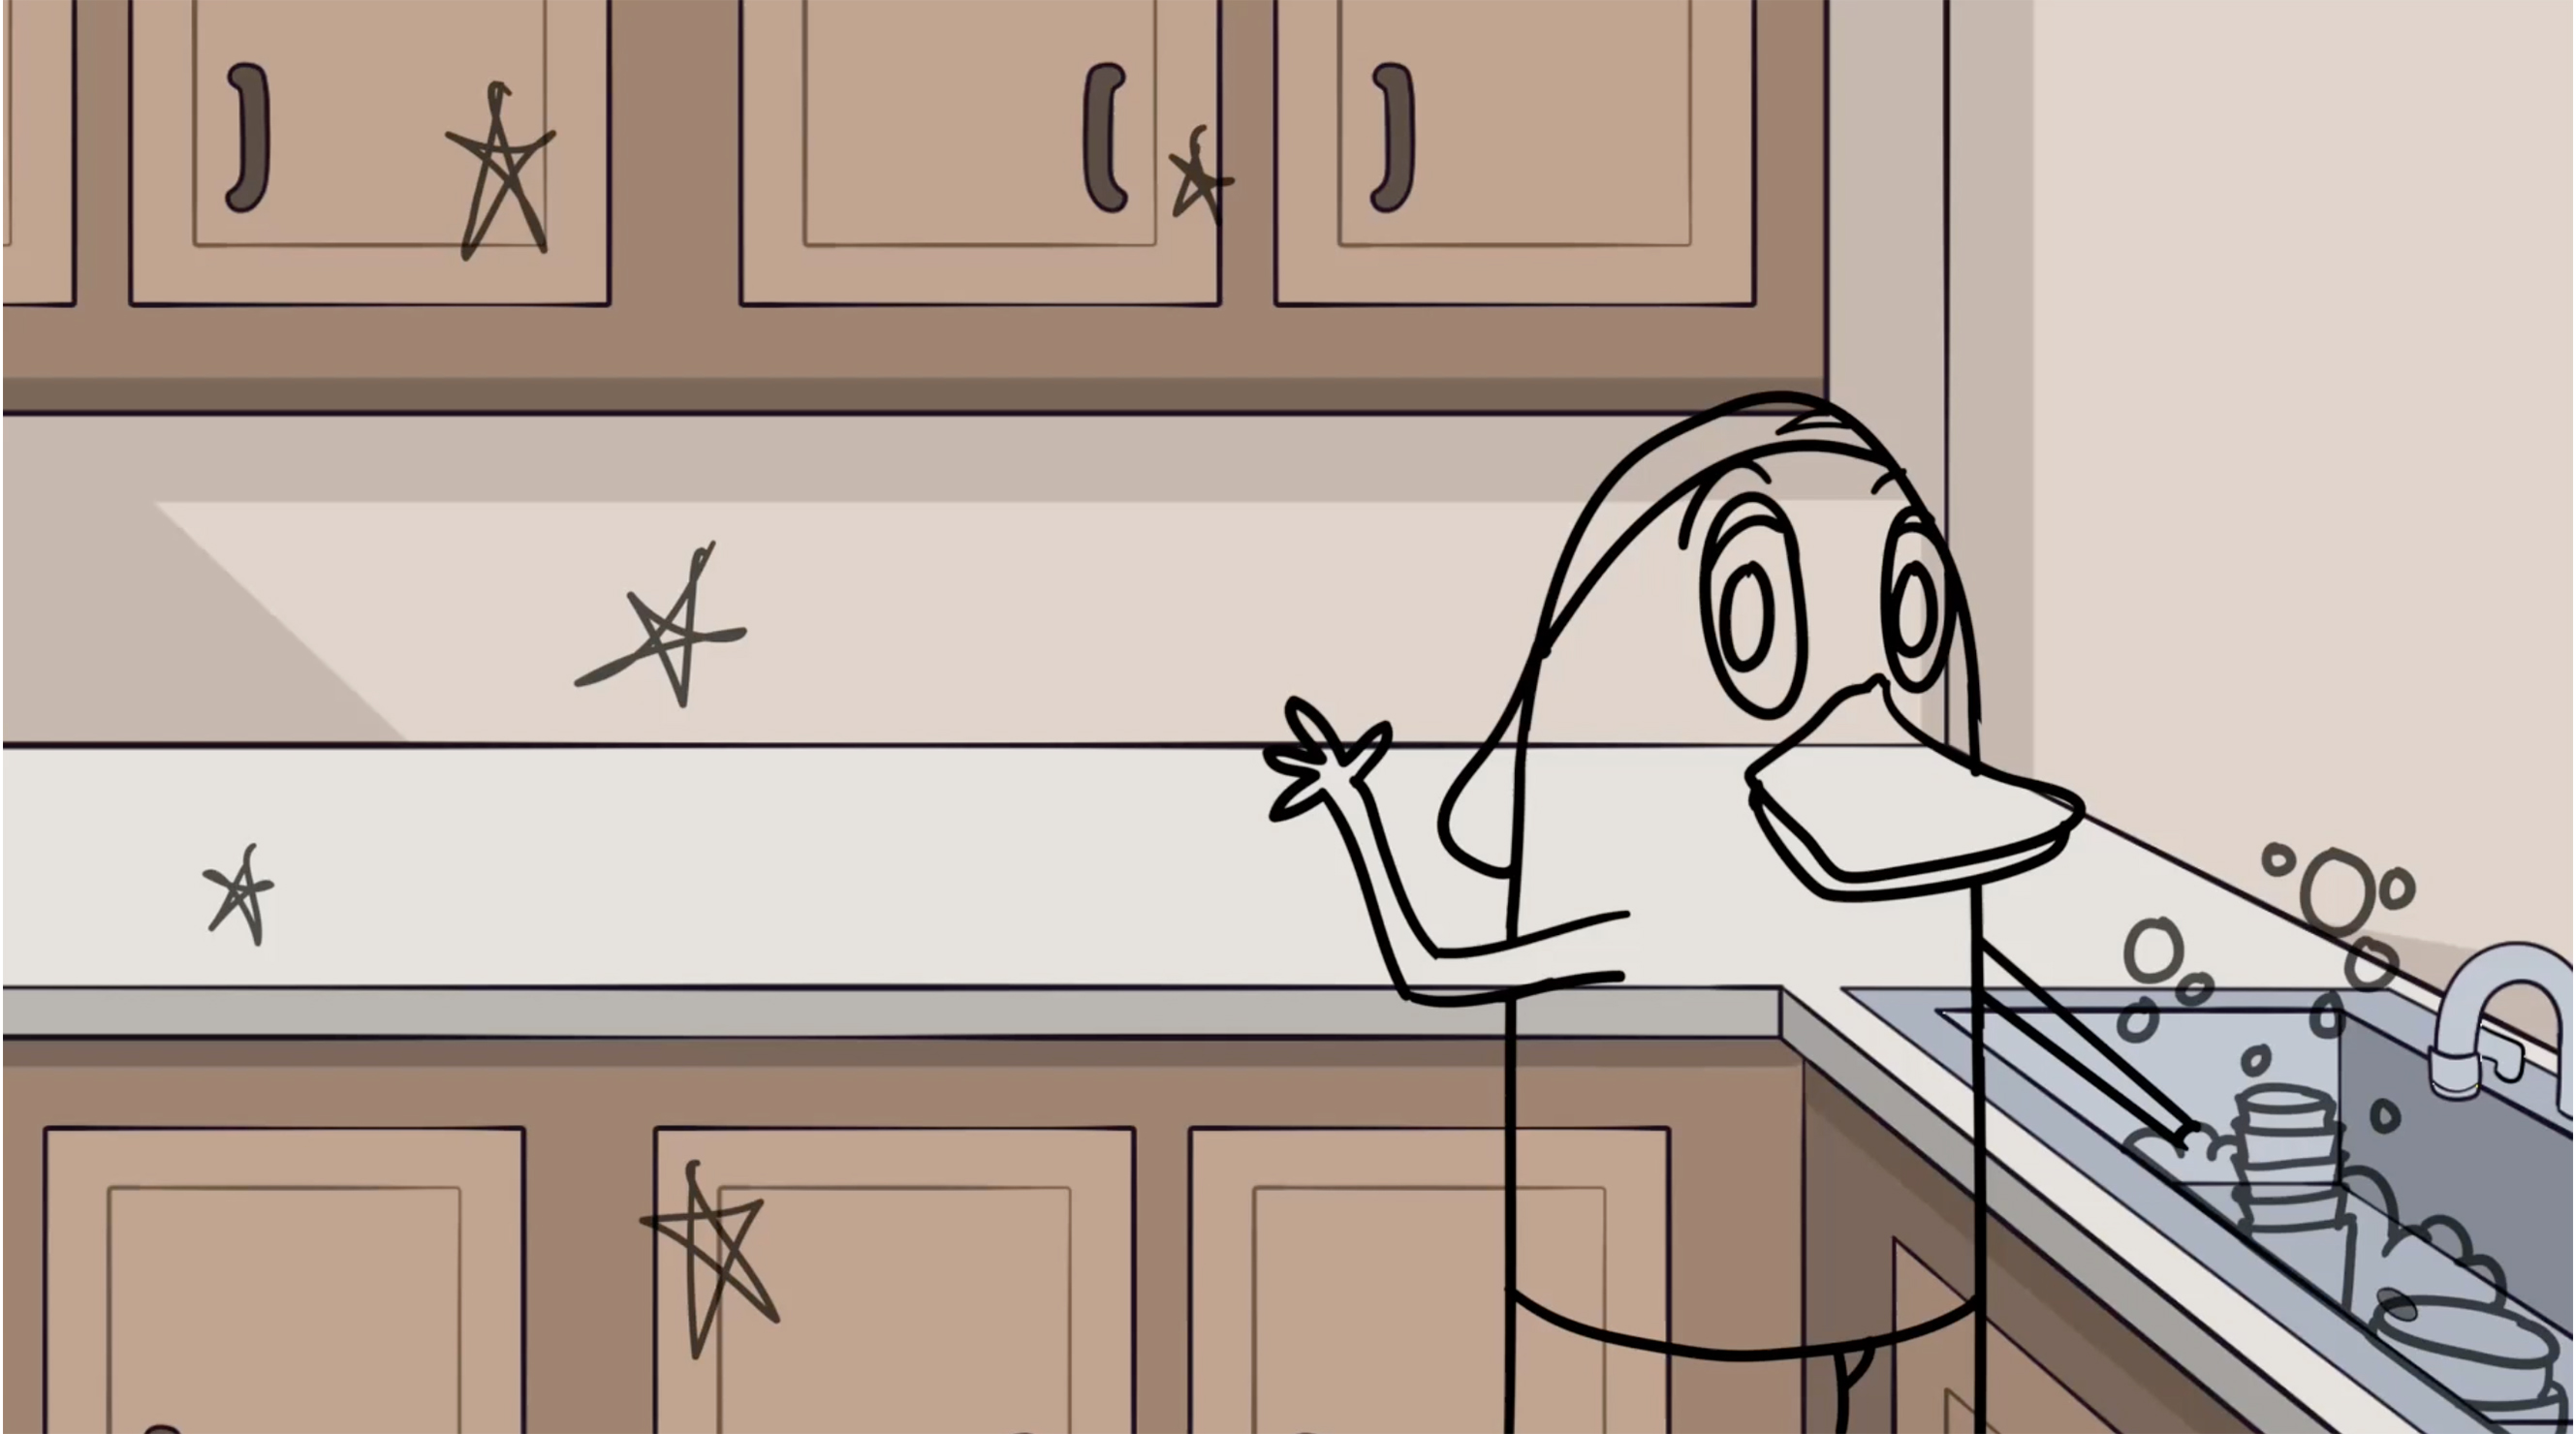  / Still of character Duck from "Roommates," a 2-minute short animation created using Photoshop and ToonBoom, rendered in Media Encoder. (2022)